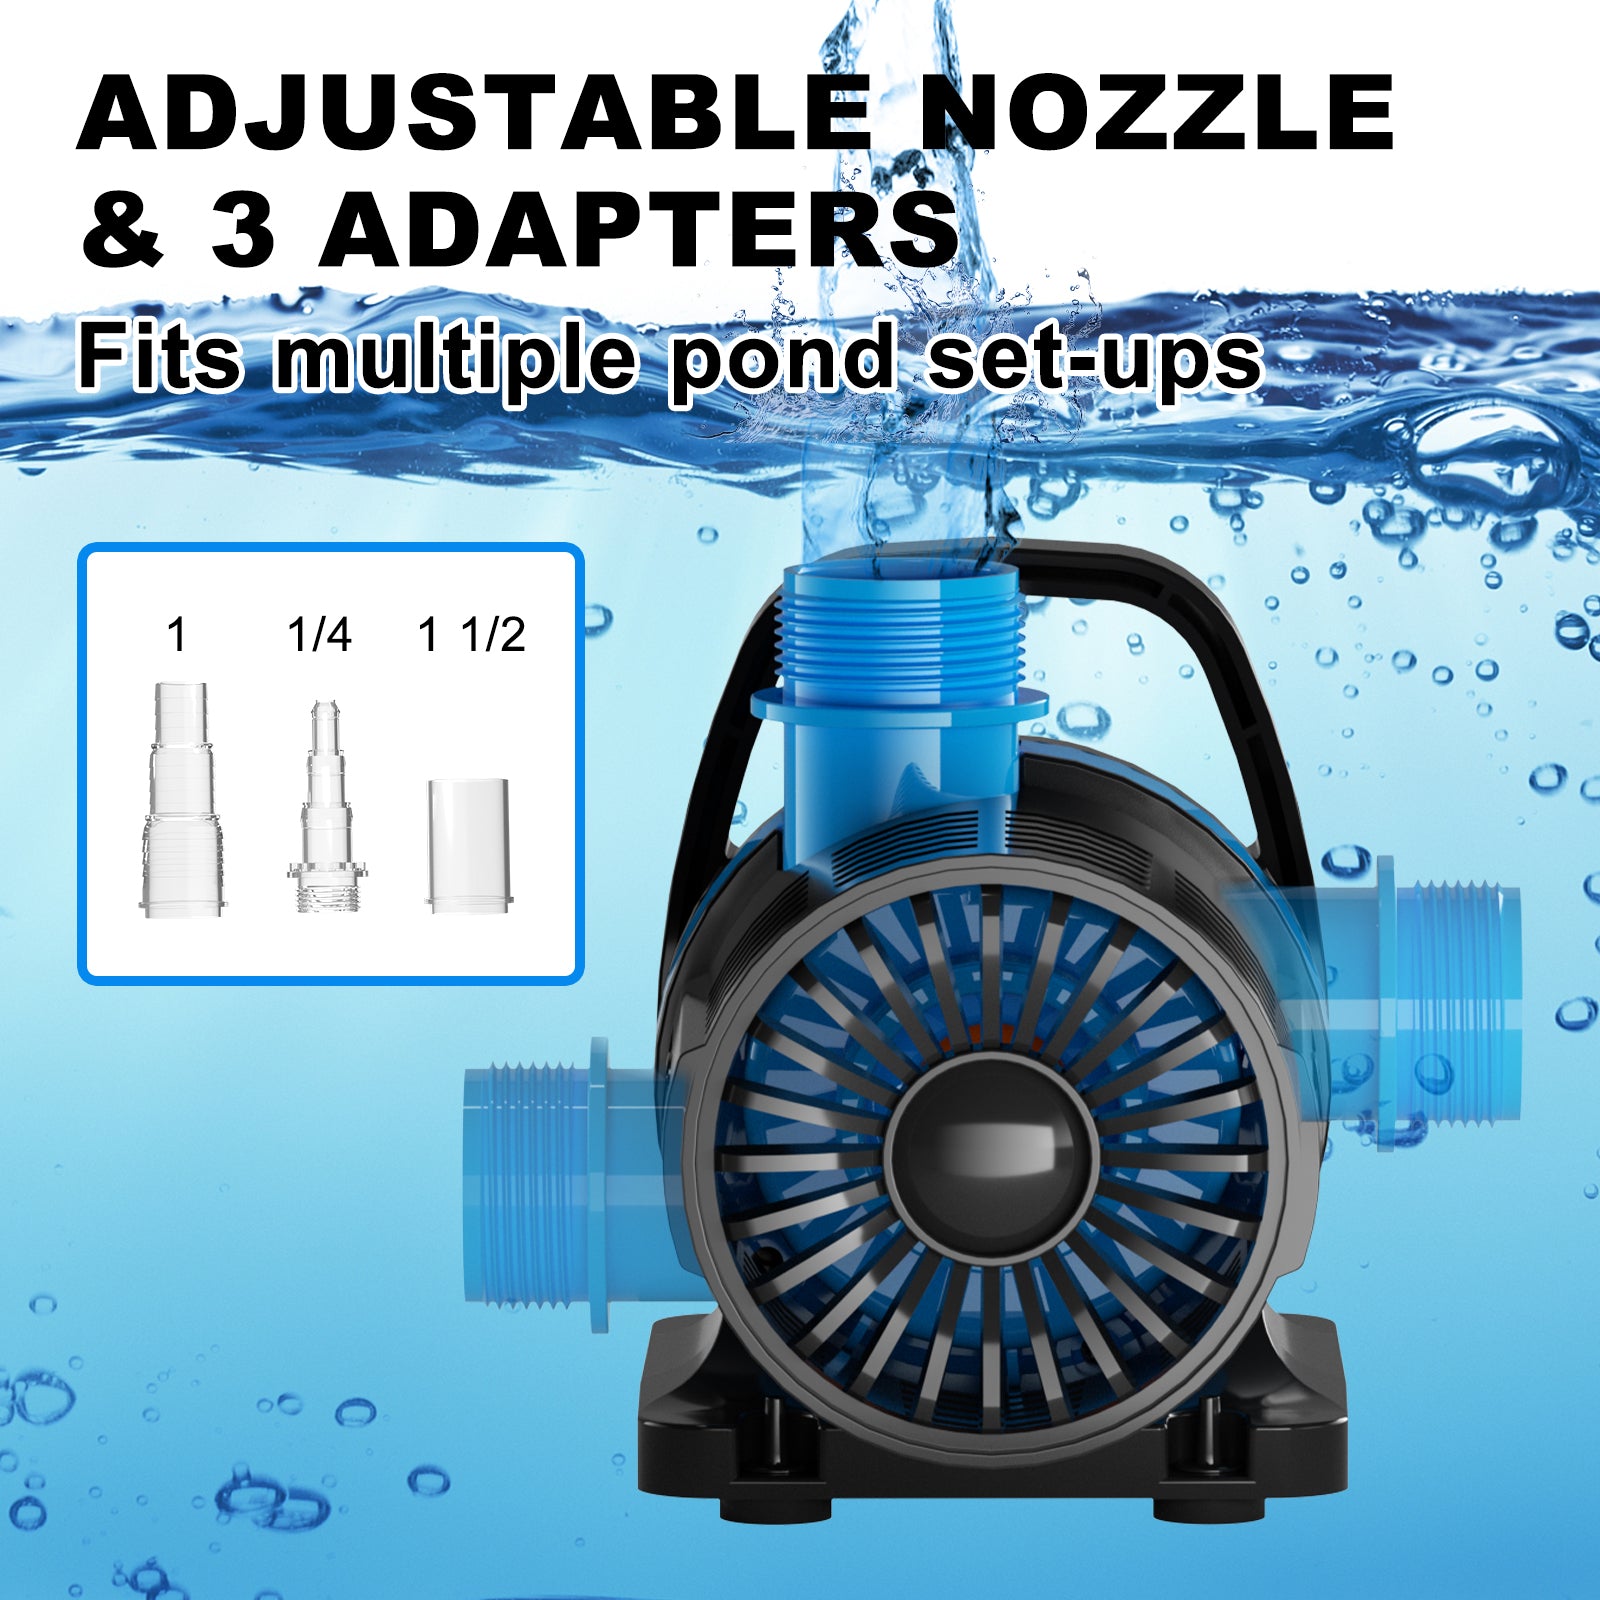 Submersible Water Pump, Pond Pump with filter, 3380GPH Ultra-quiet Fountain Pump with 16ft Cable, for Pool, Garden, Backyard, Waterfalls, and Water Circulation with 3 hoses and 1 filter bag